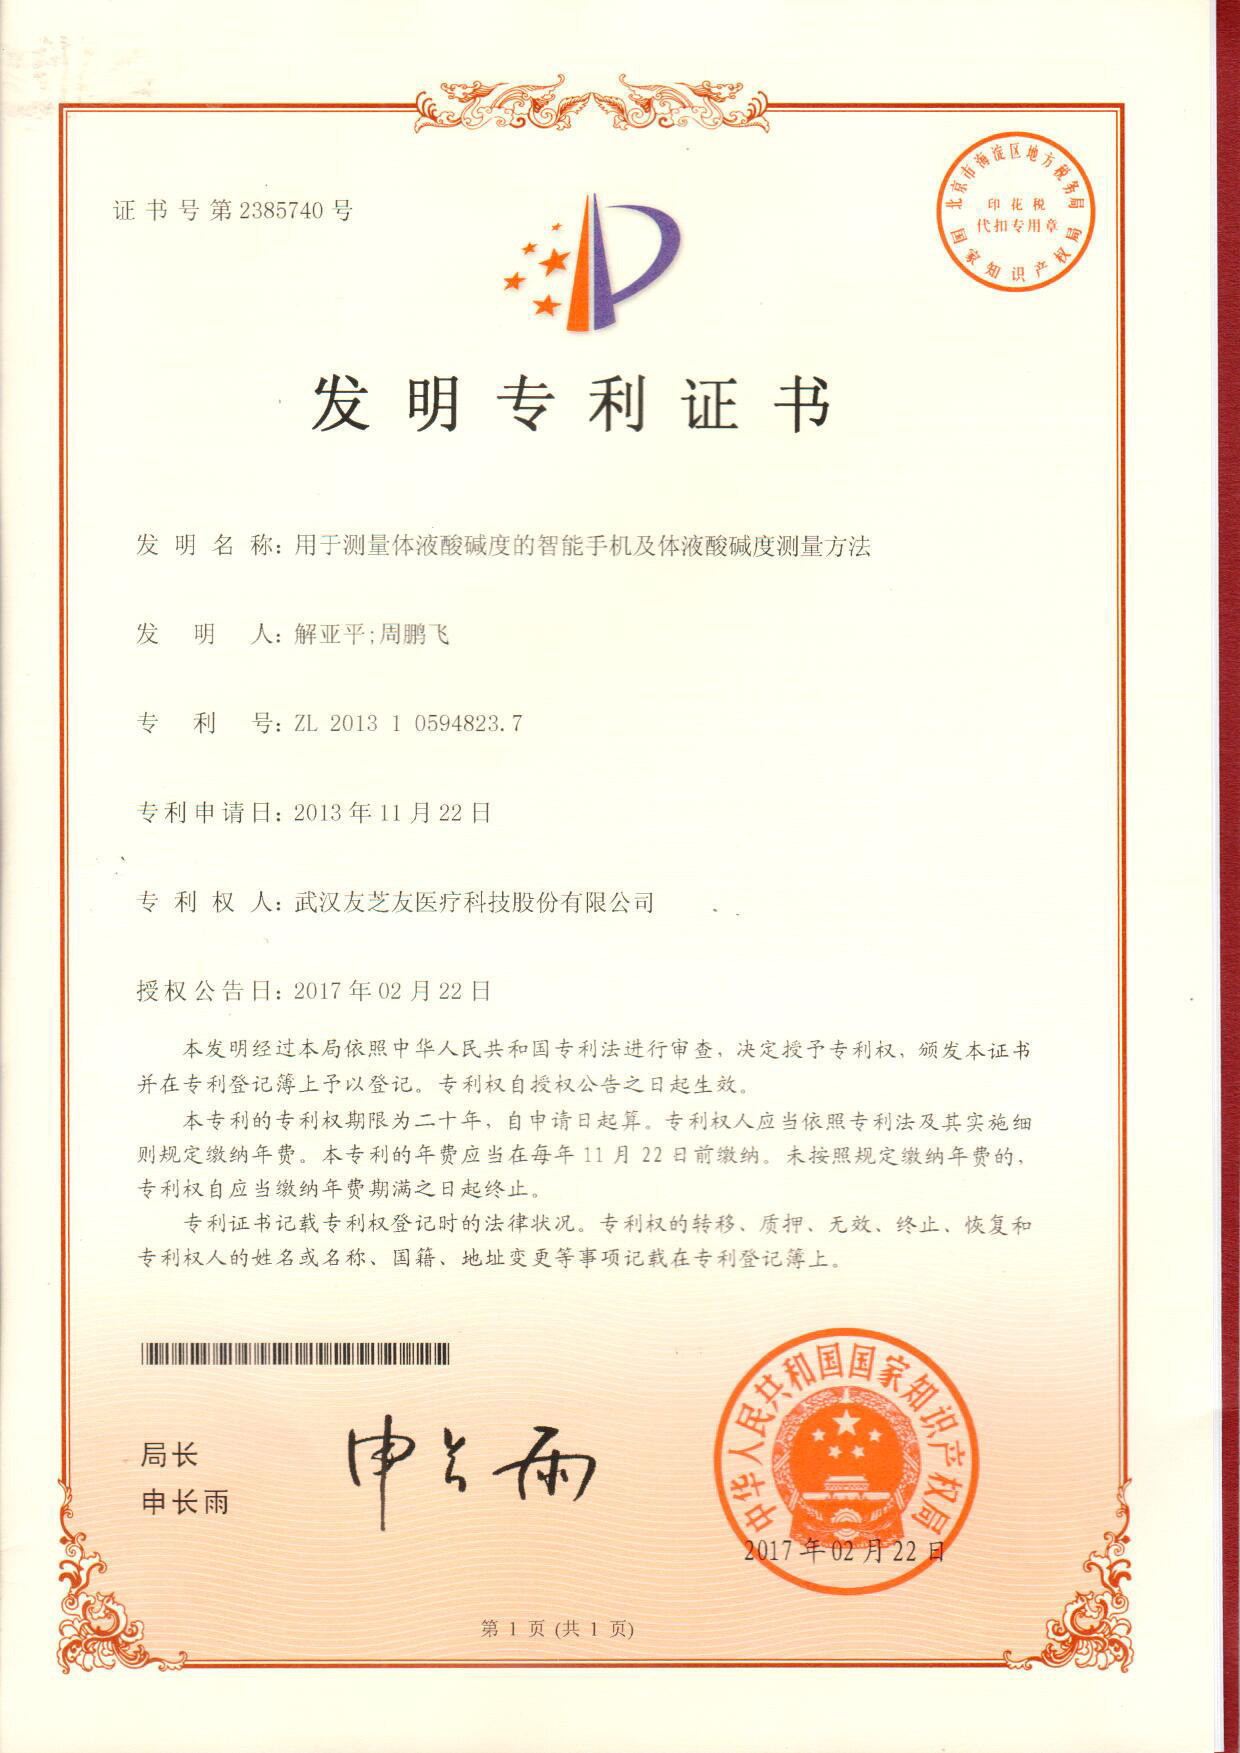 Patent Certificate for Invention of Body Fluid PH